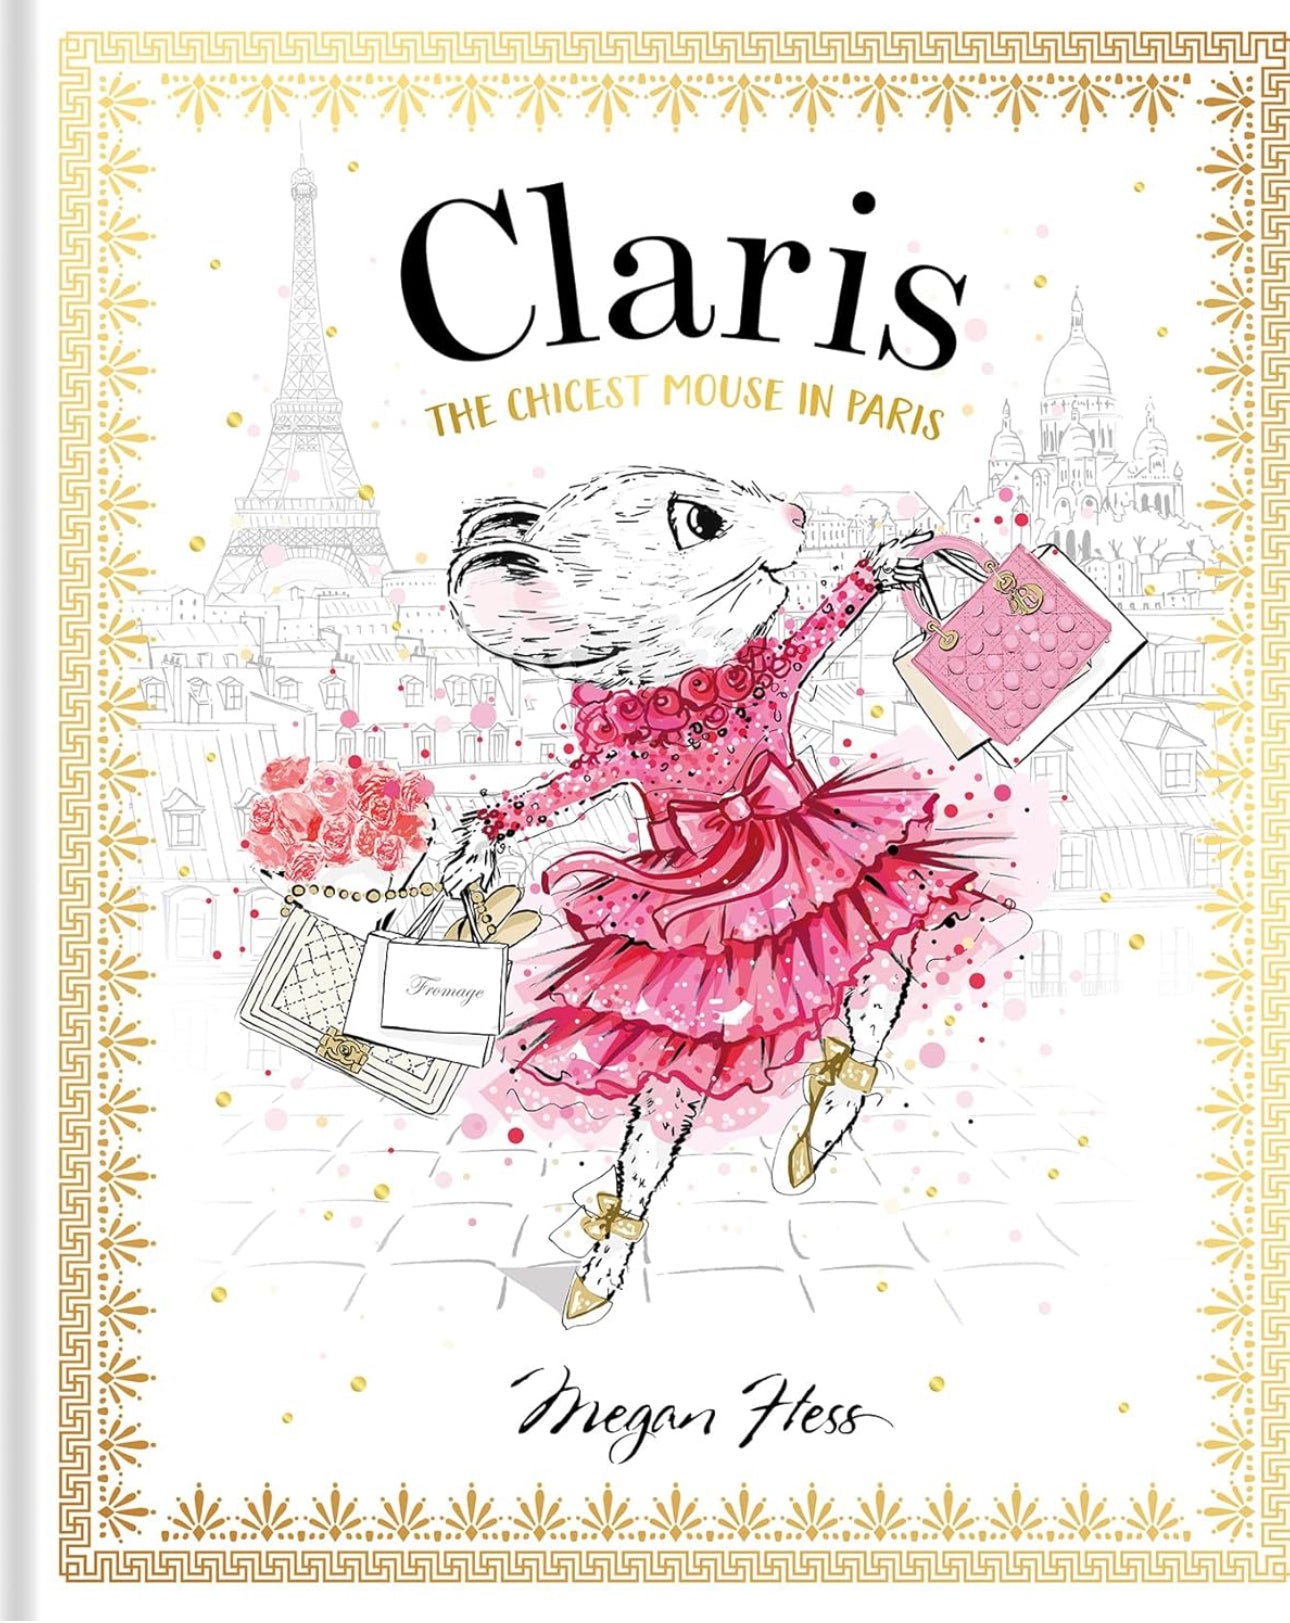 book - claris : the chicest mouse in paris